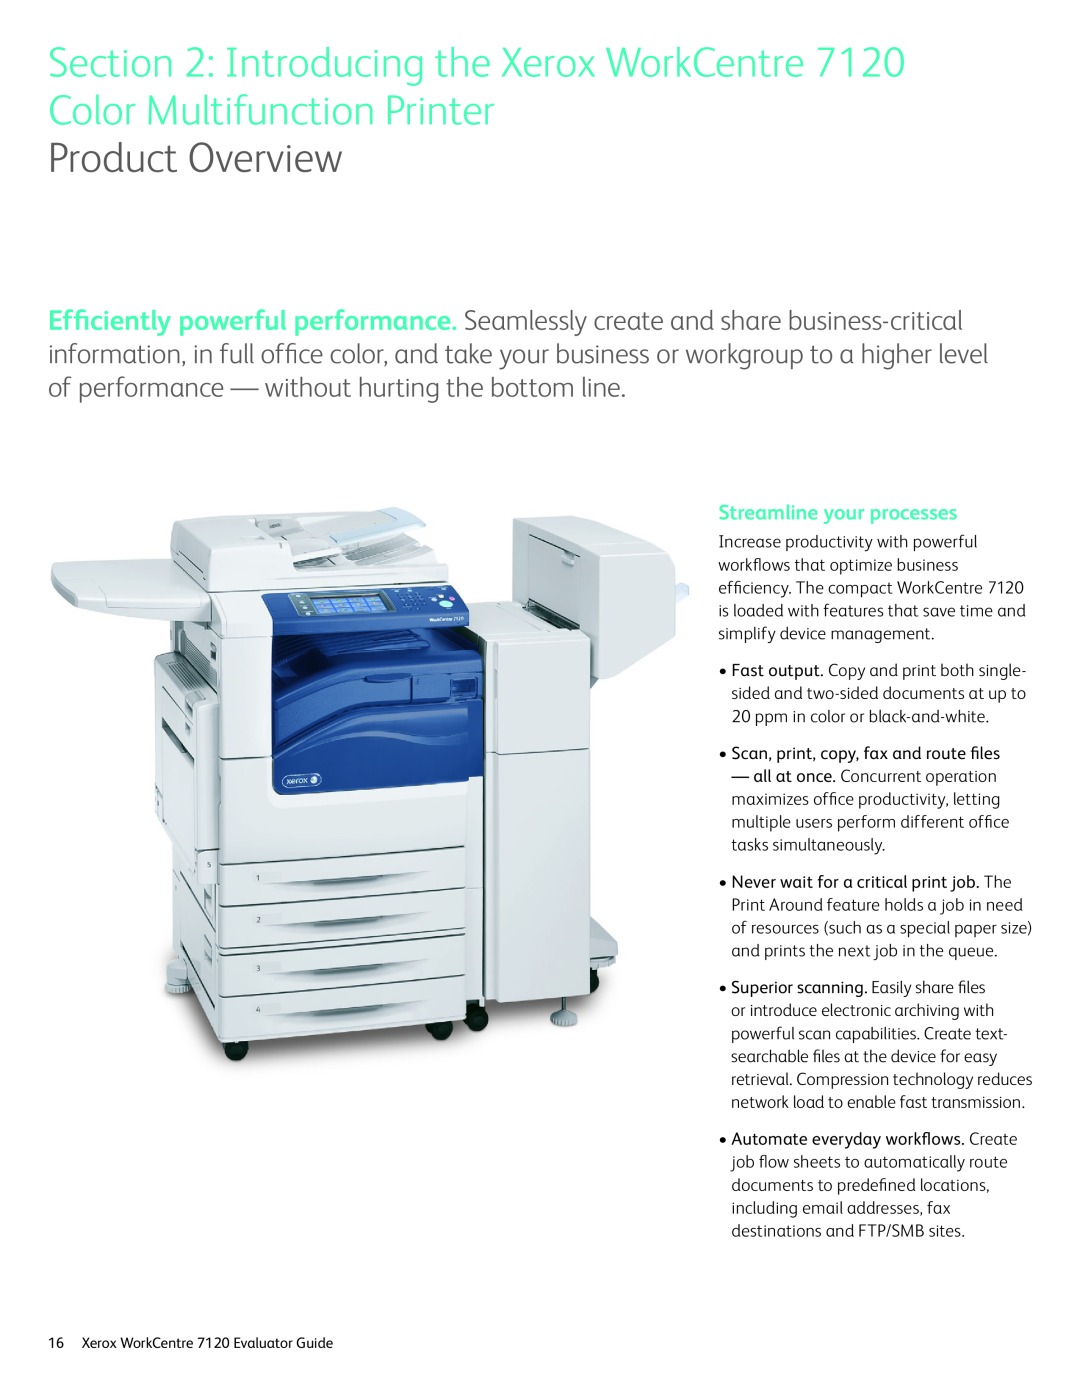 Xerox 7120 Introducing the Xerox WorkCentre, Color Multifunction Printer, Product Overview, Streamline your processes 